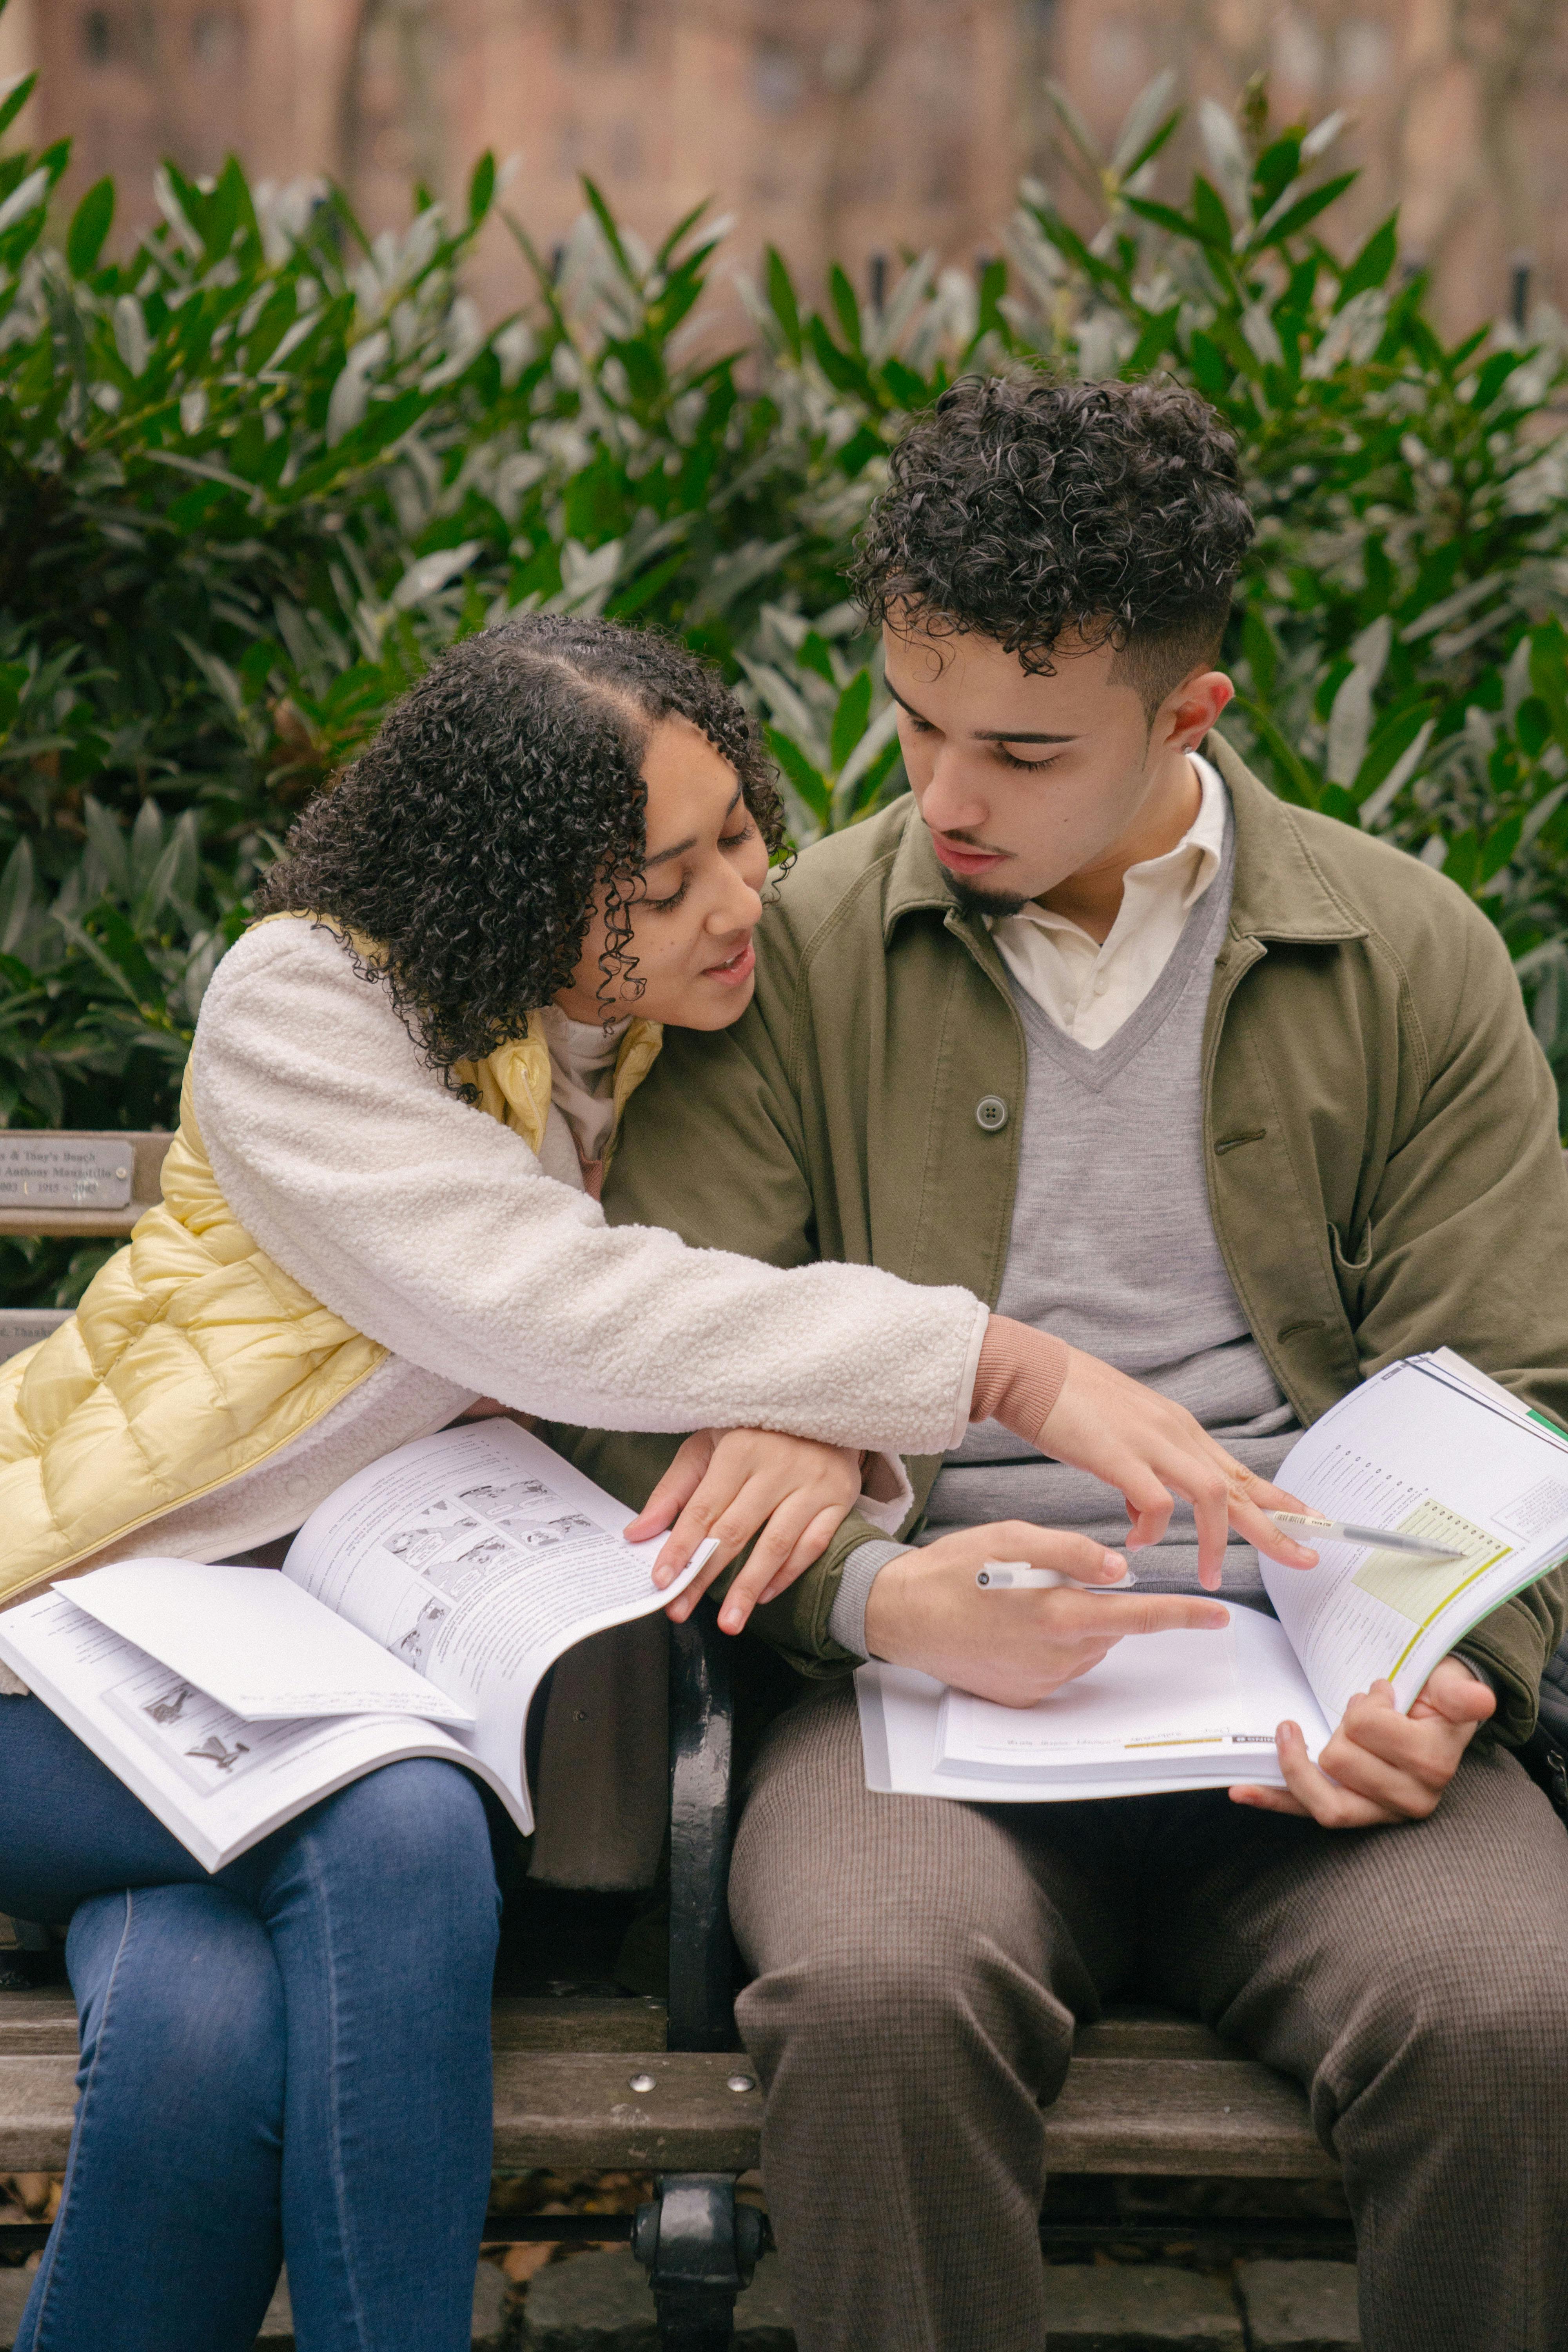 A couple studying together | Source: Pexels